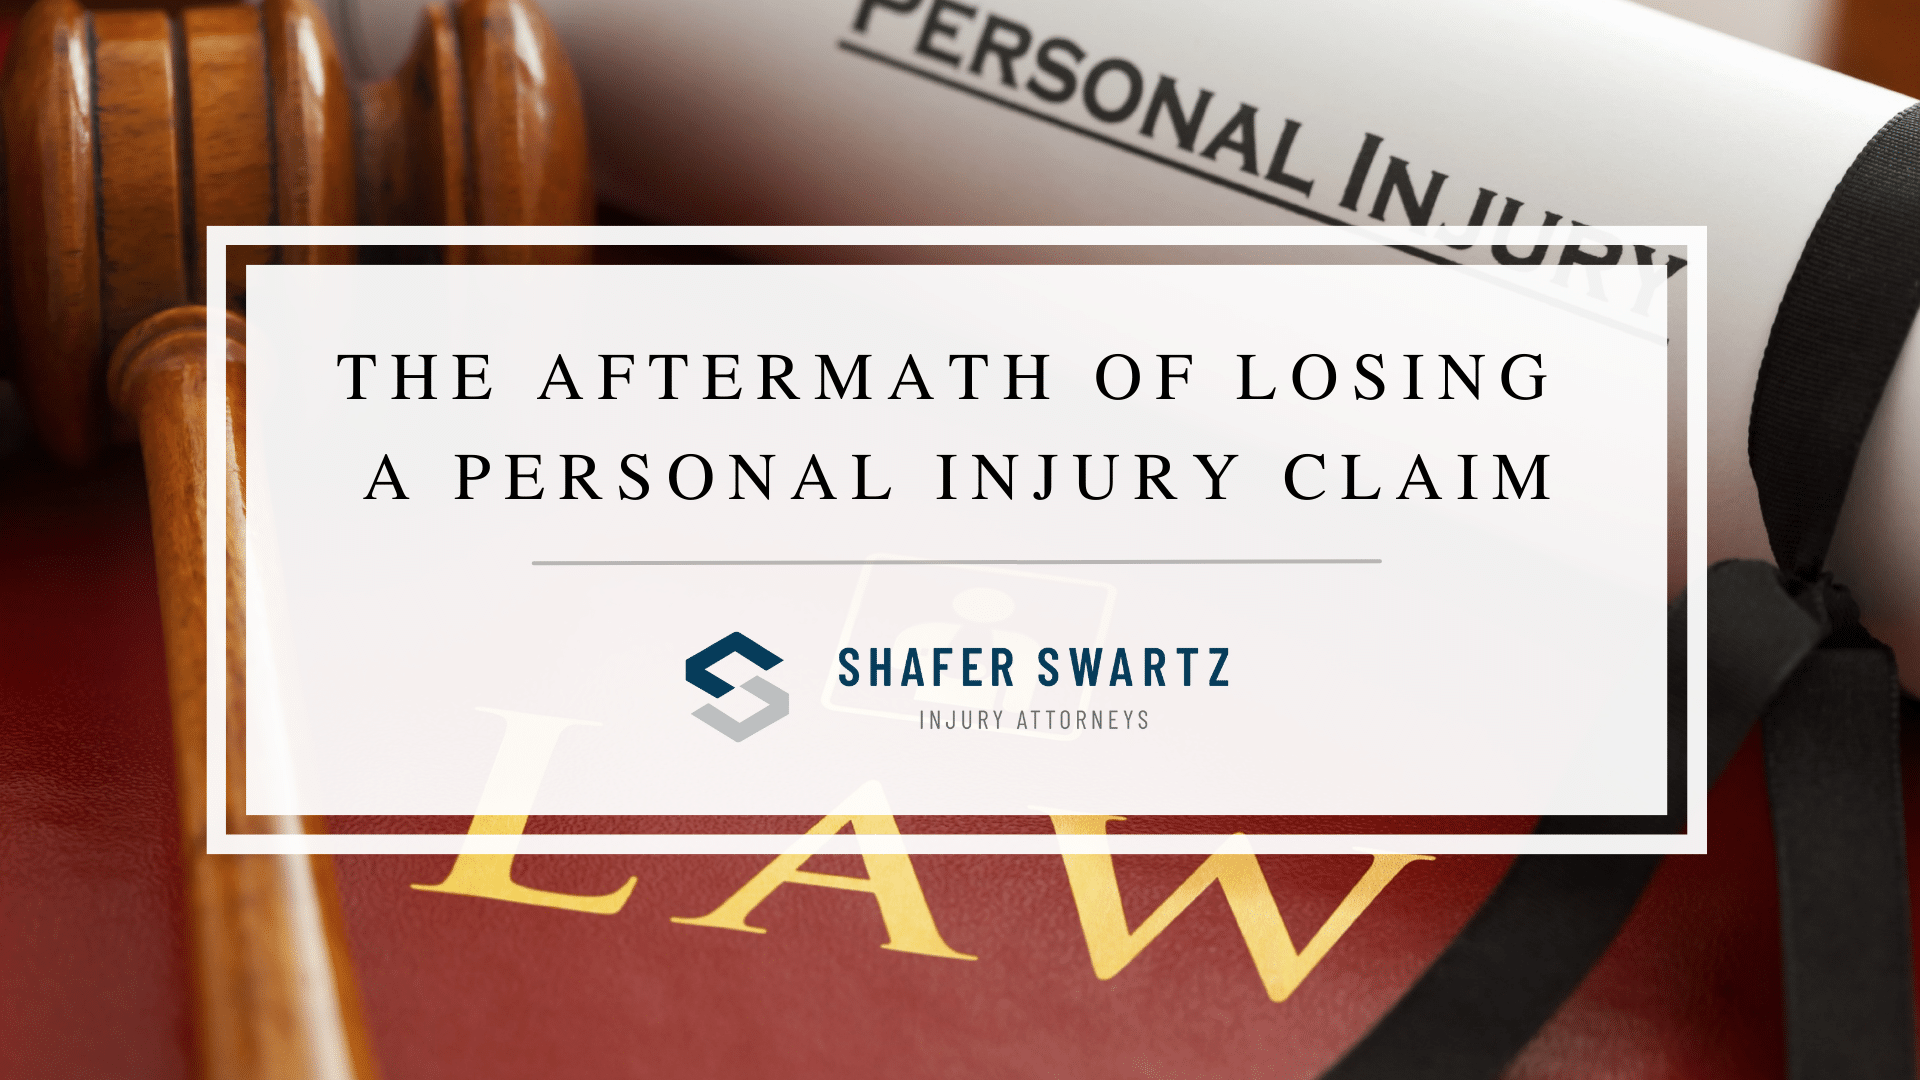 Featured image of losing a personal injury claim